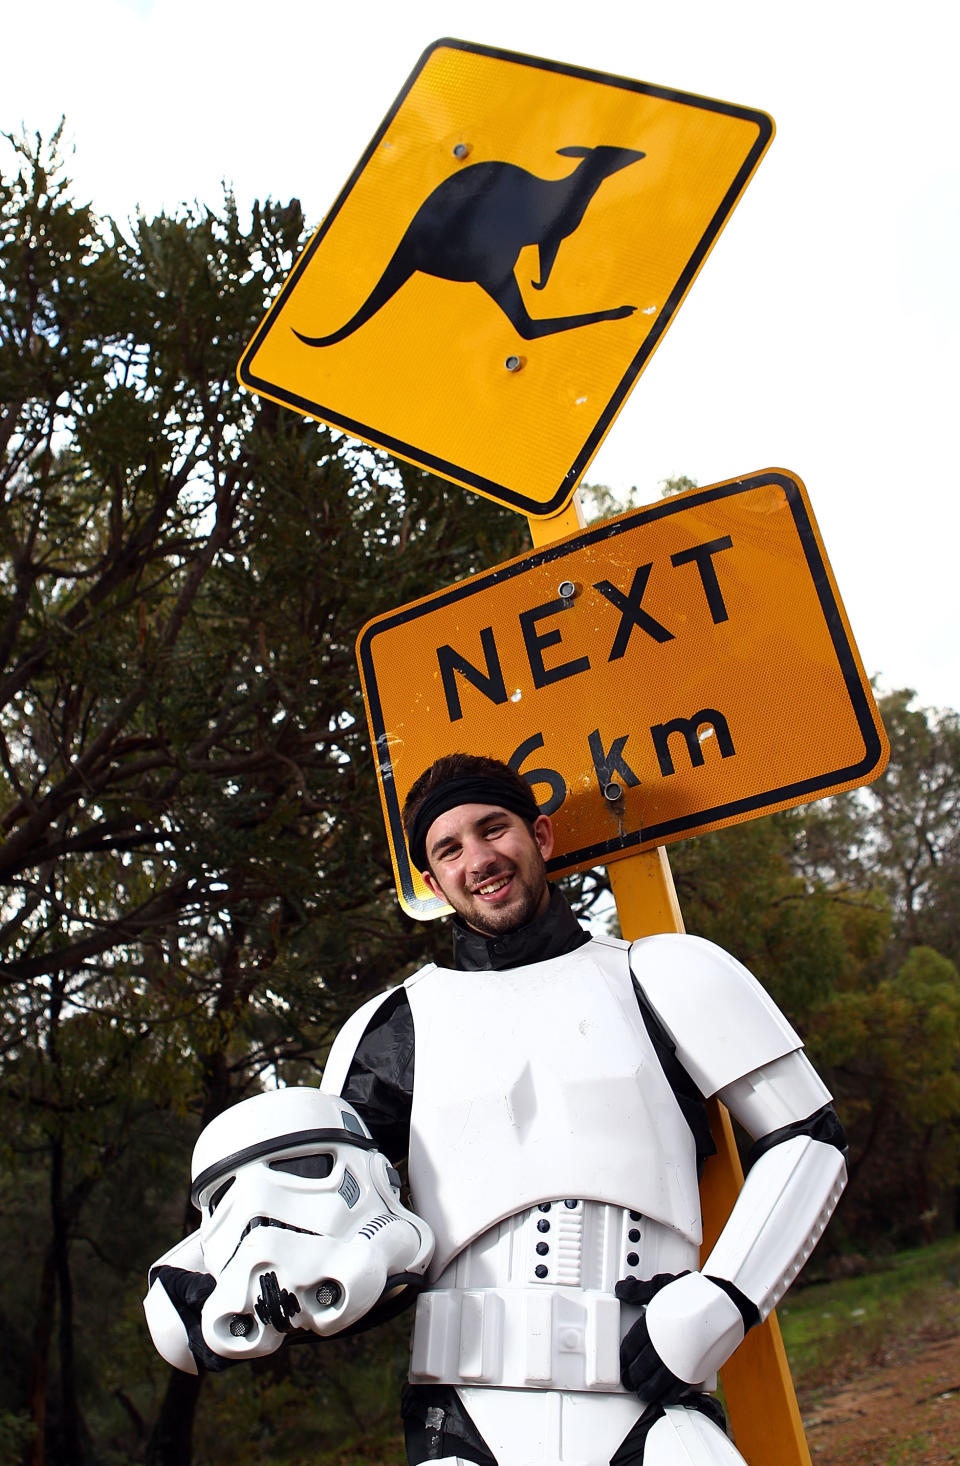 PERTH, AUSTRALIA - JULY 15: Stormtrooper Paul French is pictured on day 5 of his over 4,000 kilometre journey from Perth to Sydney taking a rest break on Old Mandurah Road on July 15, 2011 in Perth, Australia. French aims to walk 35-40 kilometres a day, 5 days a week, in full Stormtrooper costume until he reaches Sydney. French is walking to raise money for the Starlight Foundation - an organisation that aims to brighten the lives of ill and hostpitalised children in Australia. (Photo by Paul Kane/Getty Images)